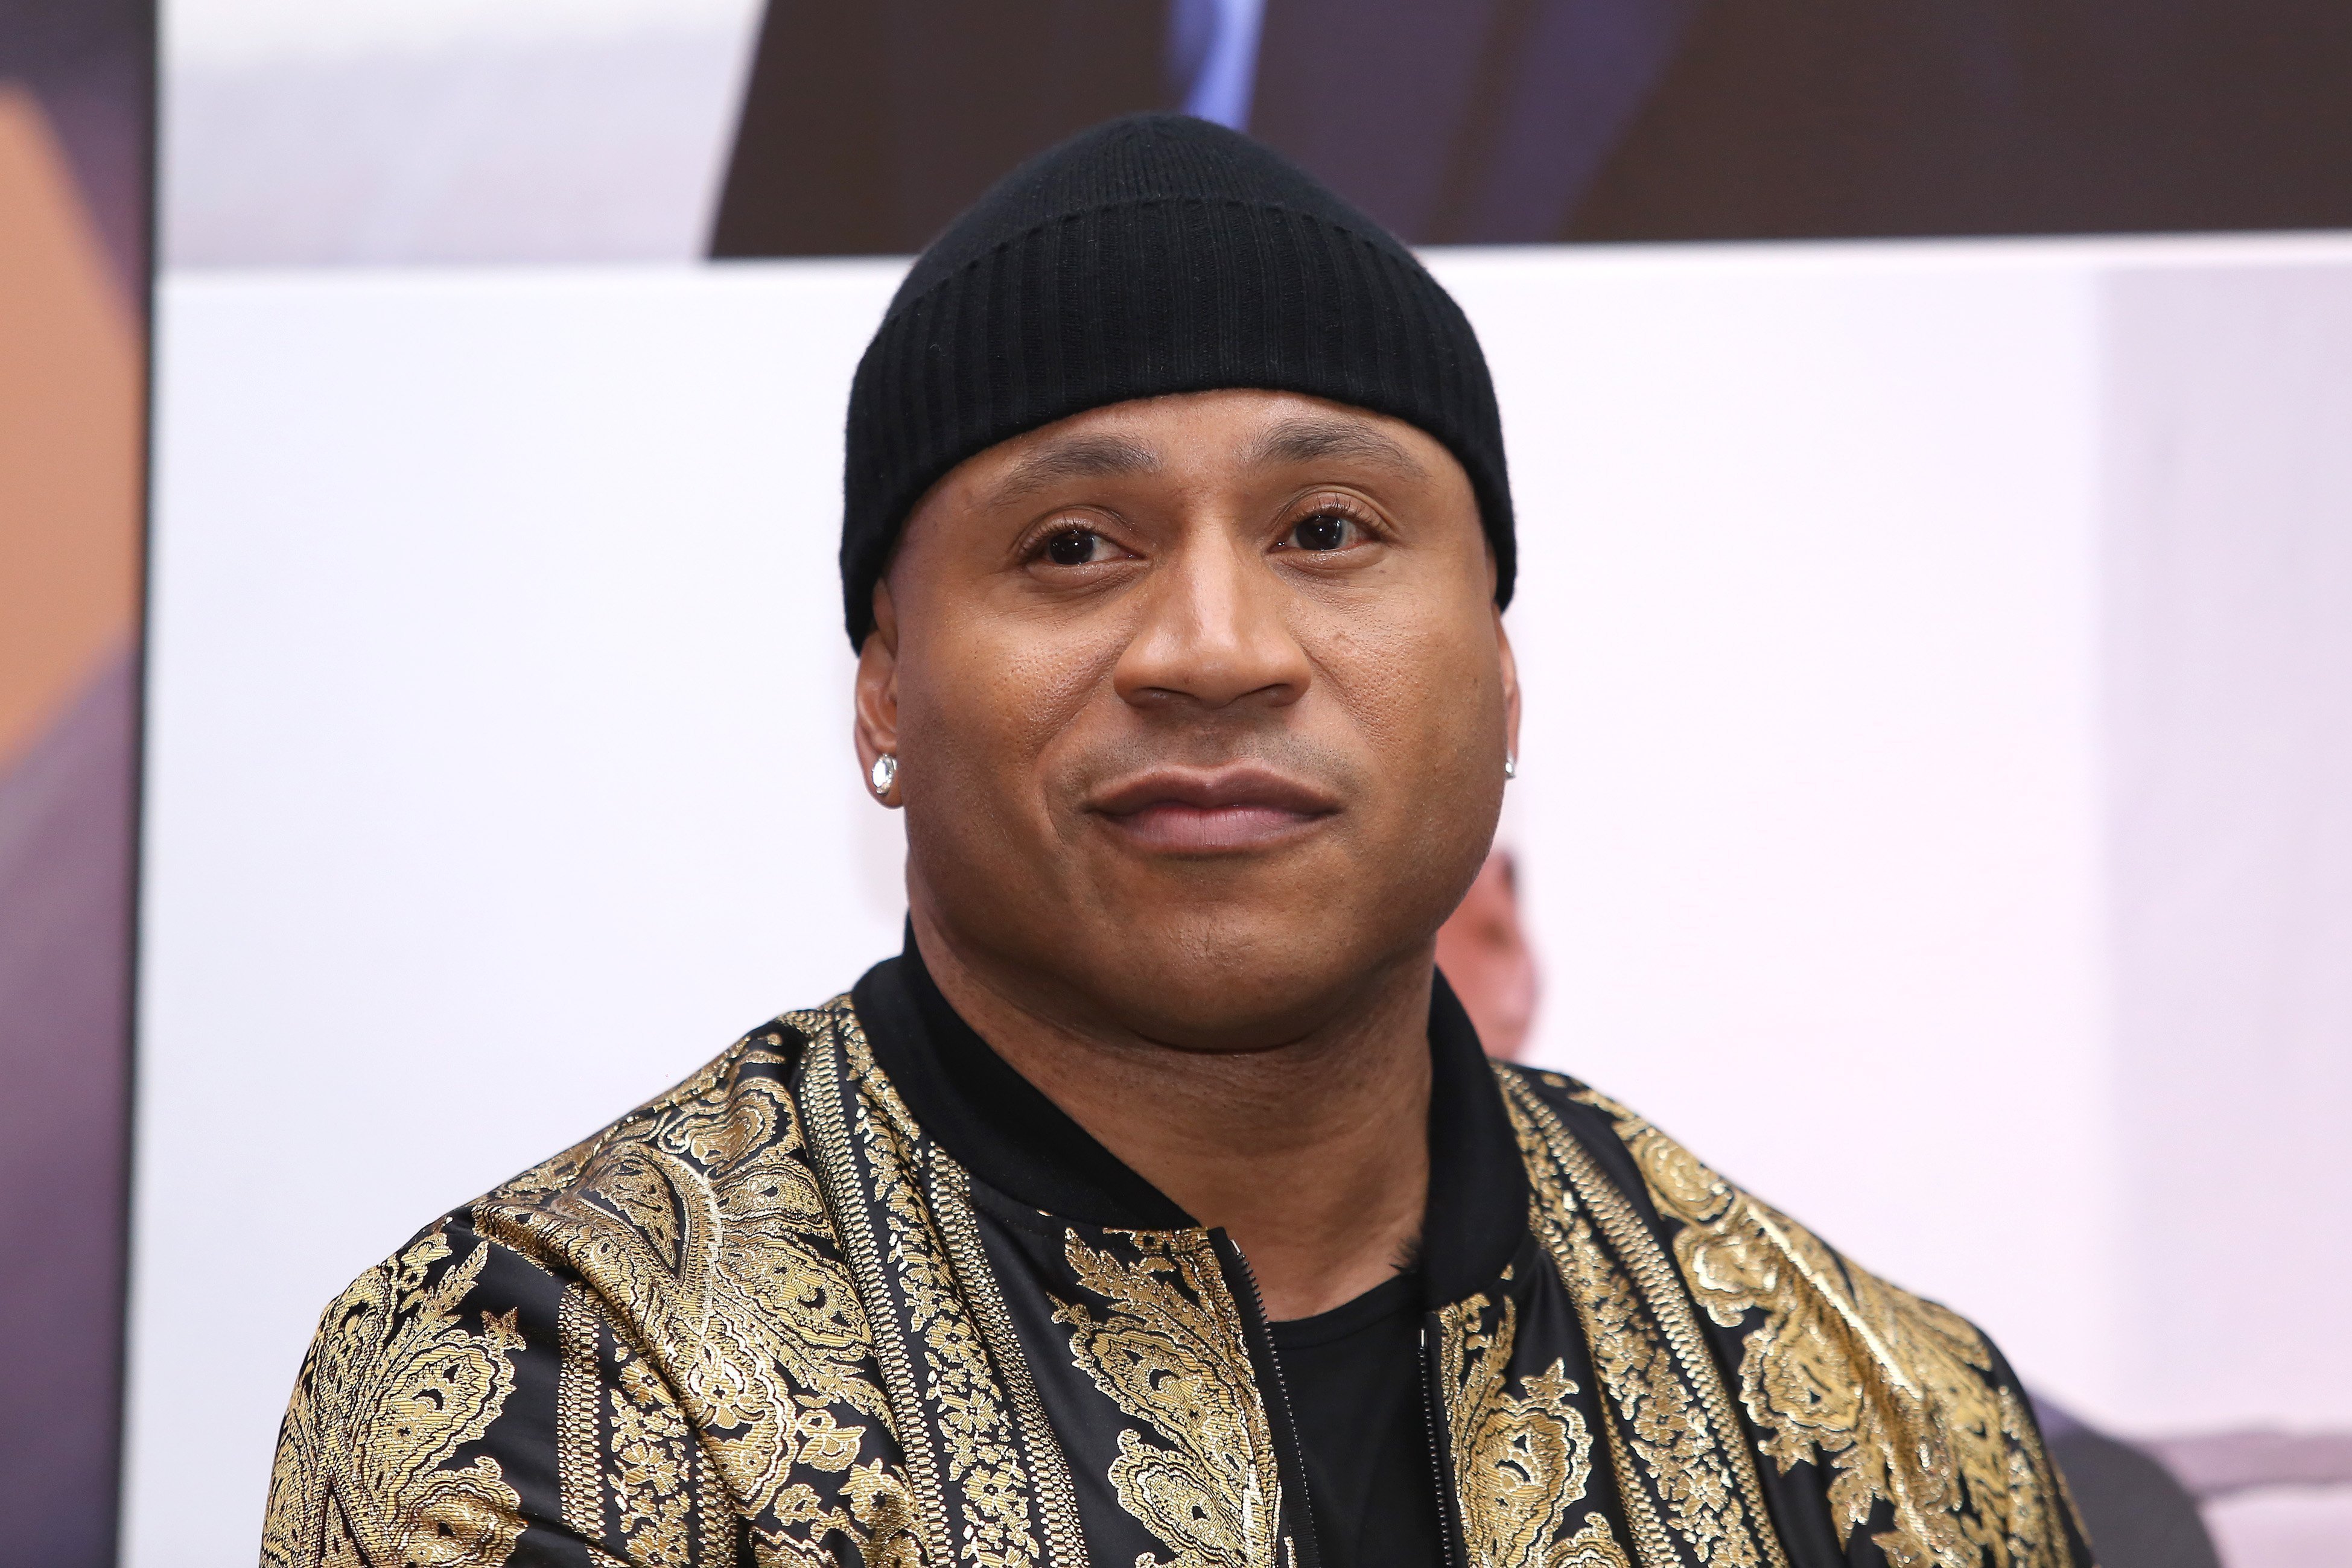 LL Cool J poses for photos during a press conference at Hotel St. Regis on June 5, 2019 in Mexico City, Mexico | Photo: Getty Images